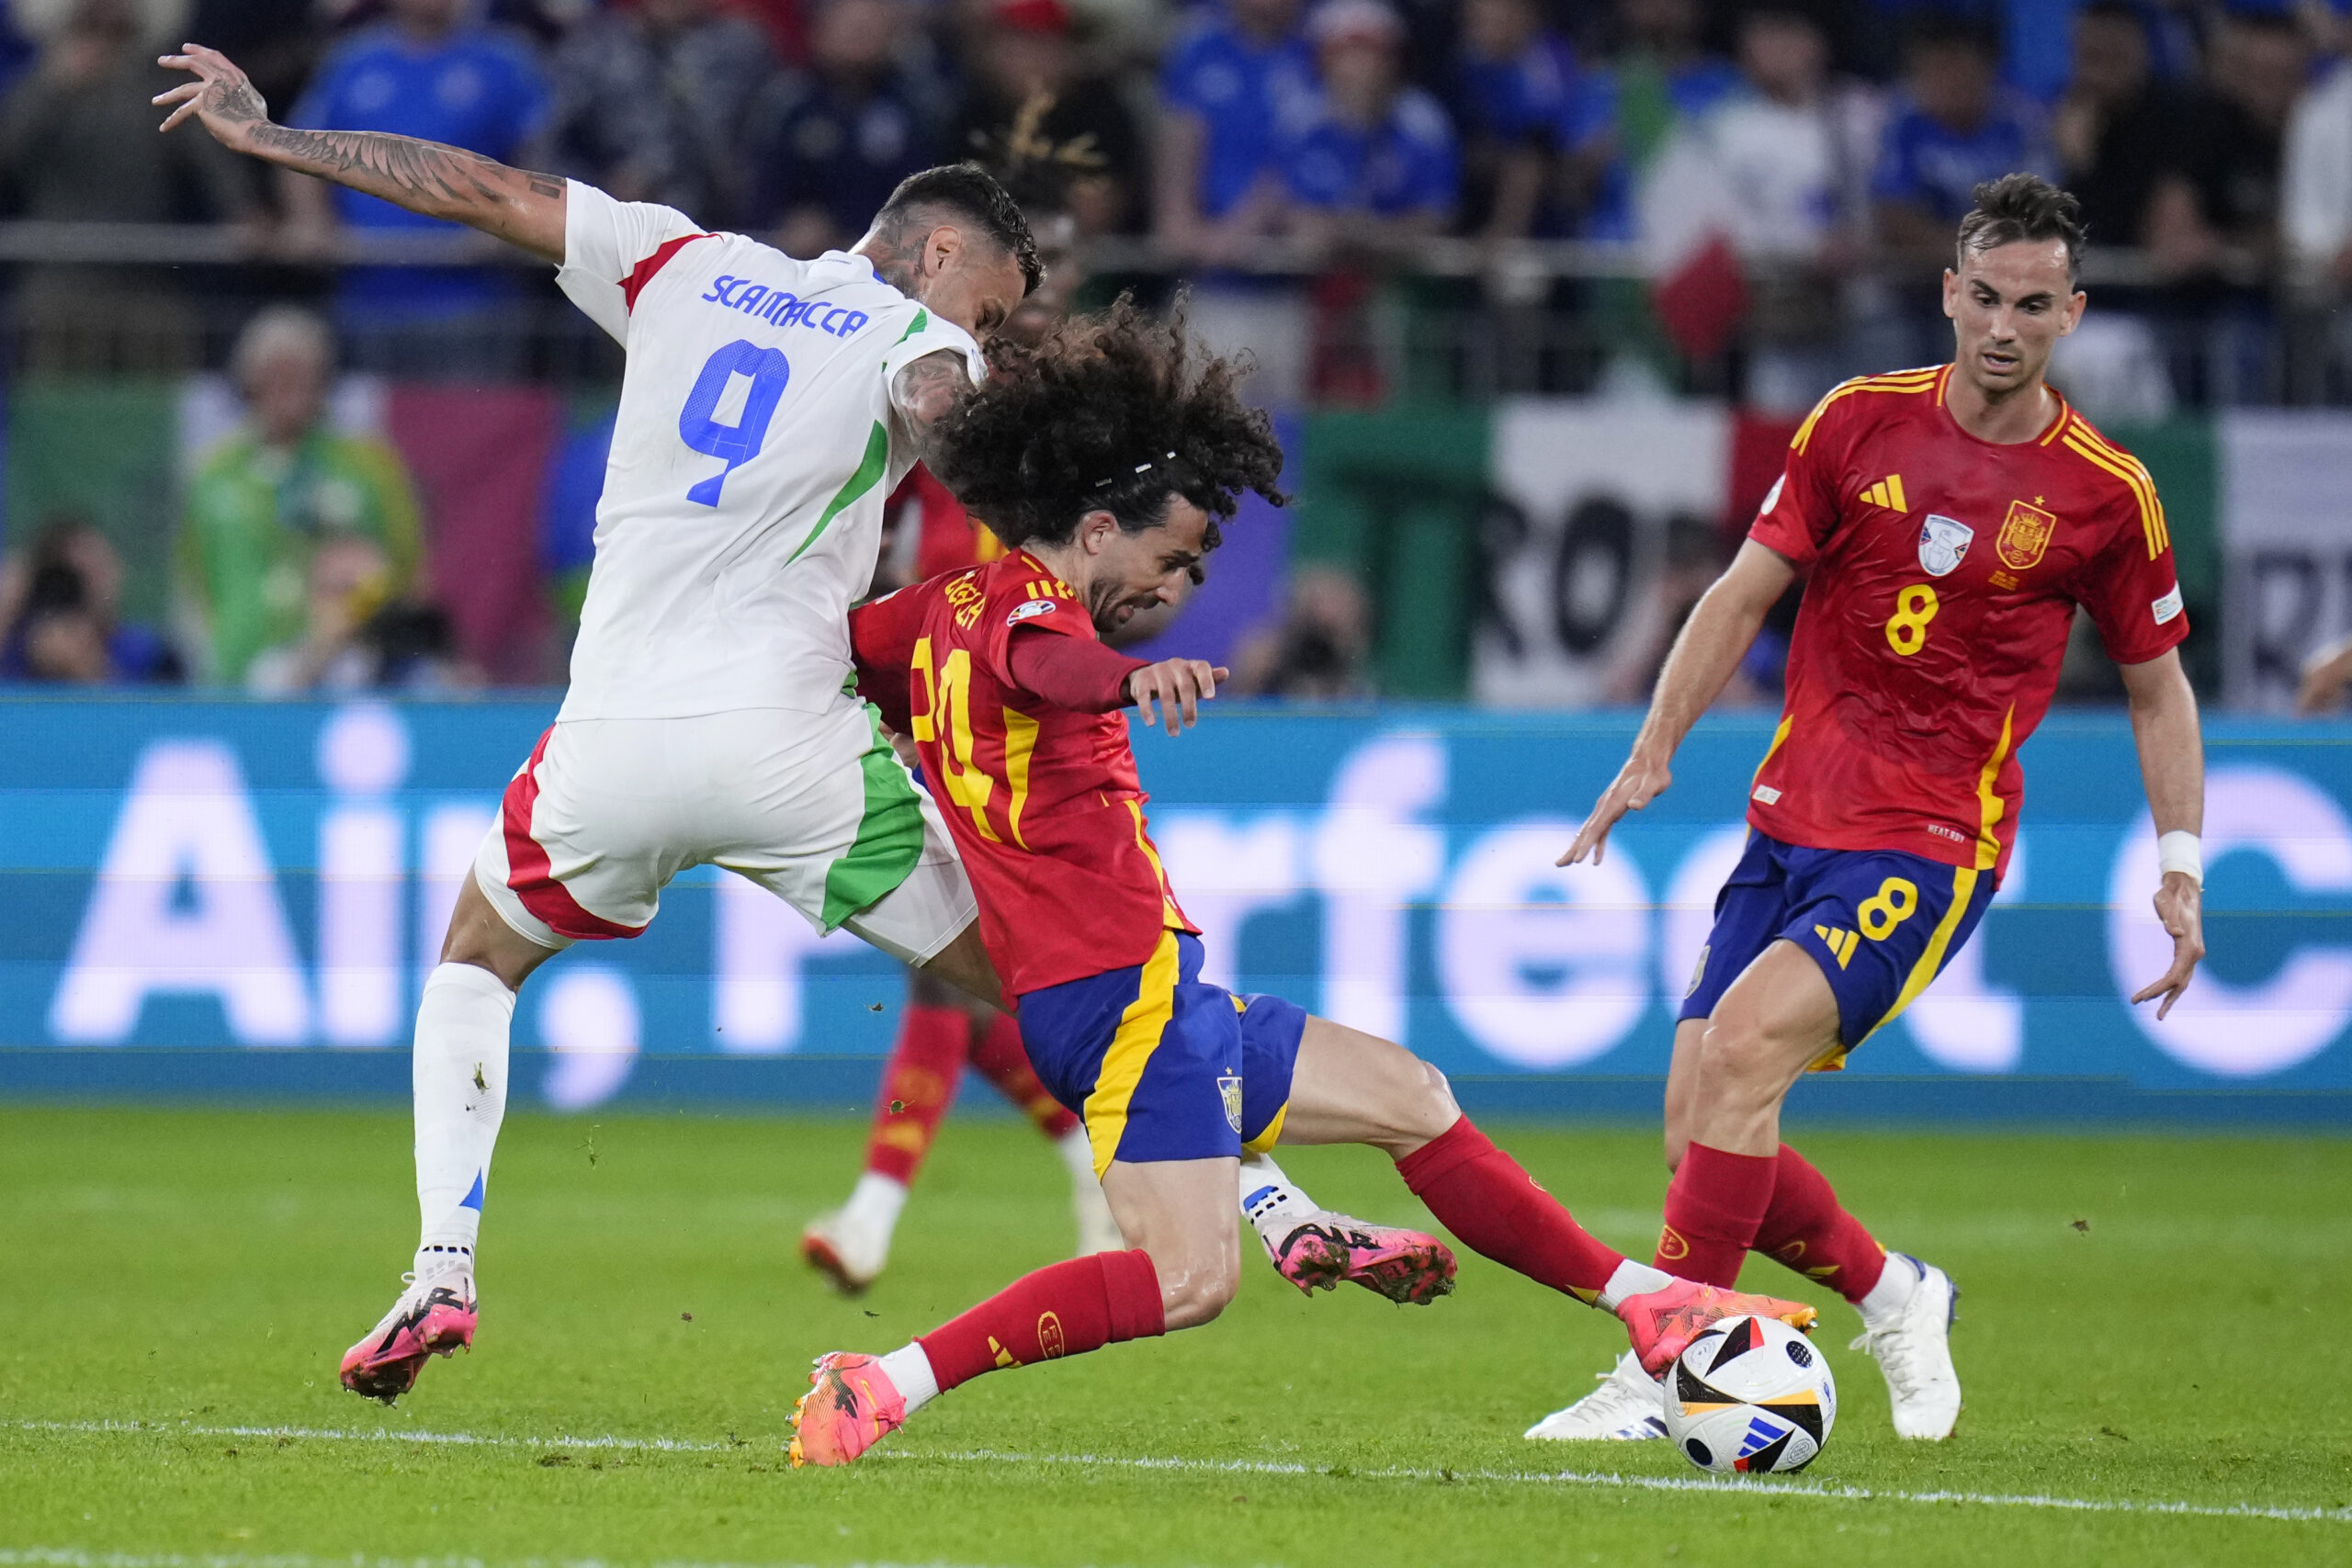 Spain's Marc Cucurella (24) and Italy's Gianluca Scamacca (9) battle for the ball during a Group B match between Spain and Italy at the Euro 2024 soccer tournament in Gelsenkirchen, Germany, Thursday, June 20, 2024. (AP Photo/Manu Fernandez)